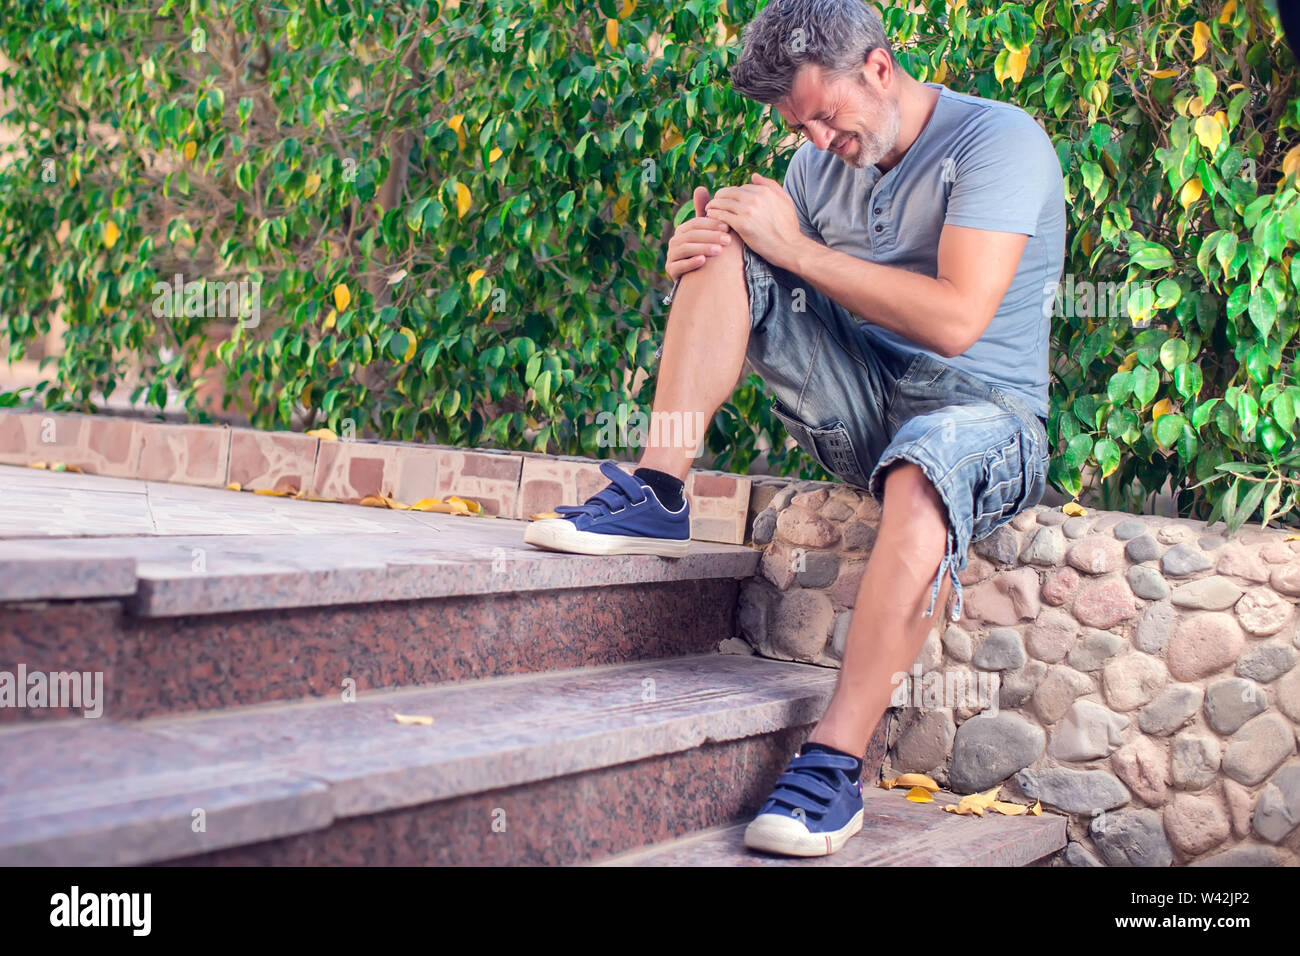 Man feels strong knee pain while walking outdoor. People, healthcare and medicine concept Stock Photo